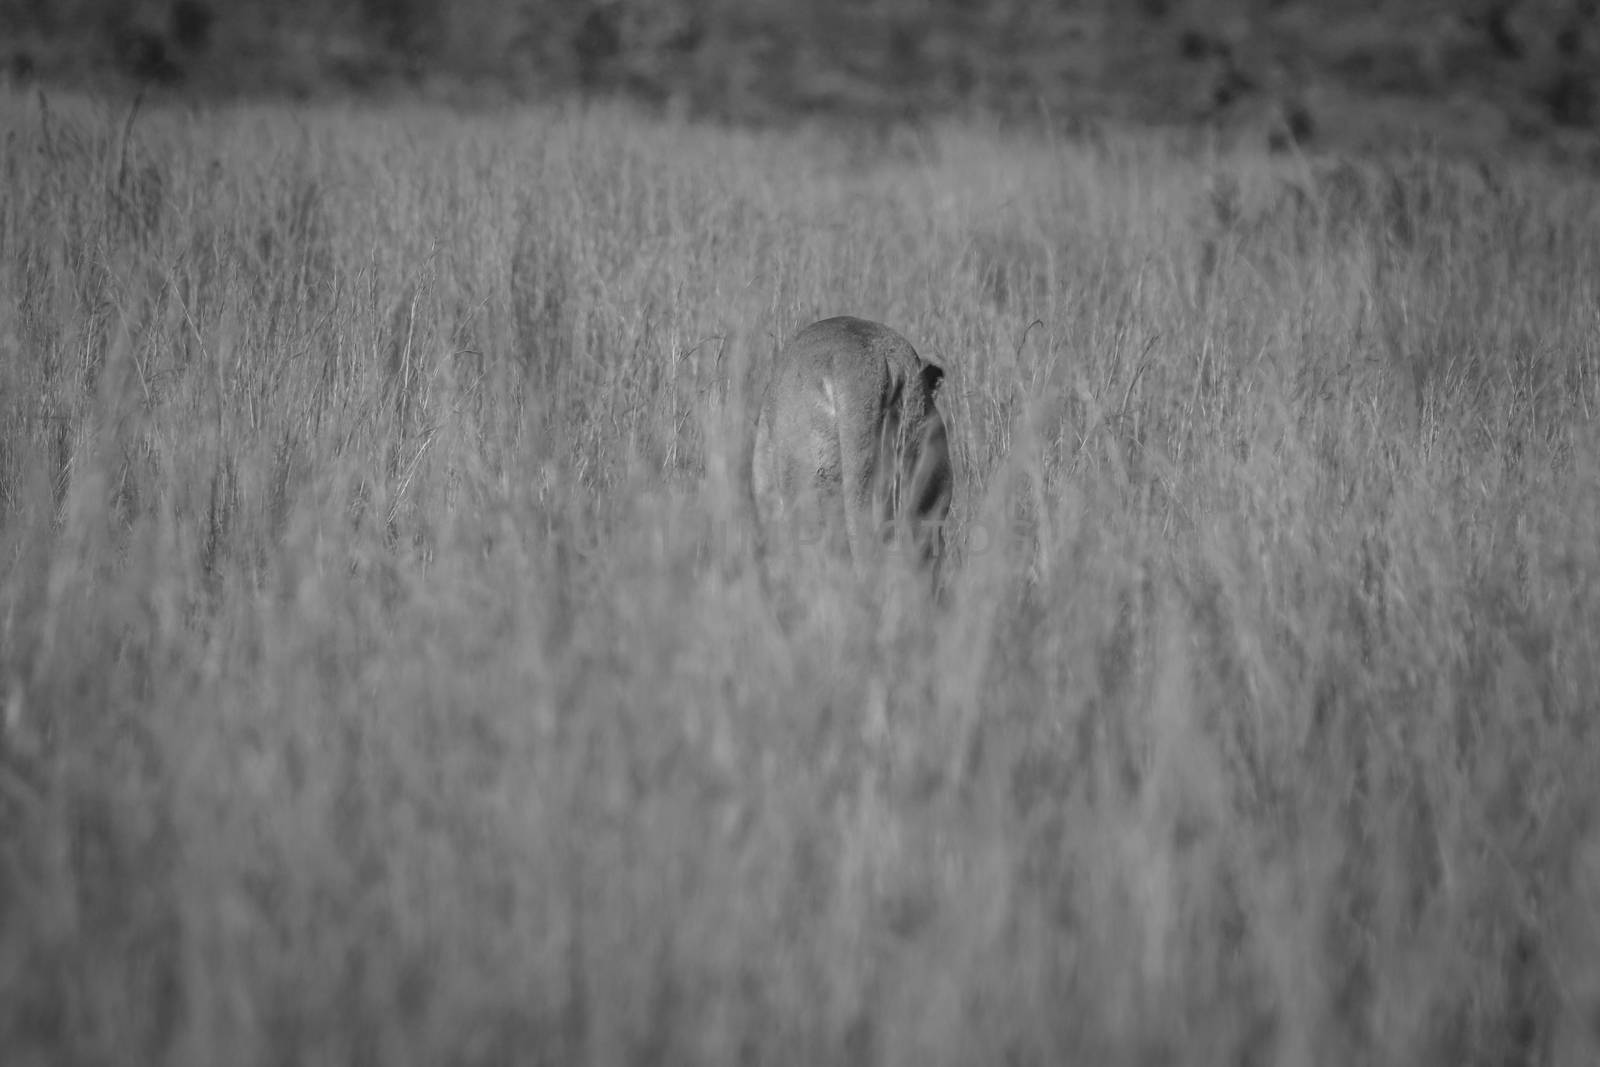 Lioness walking in the high grass. by Simoneemanphotography